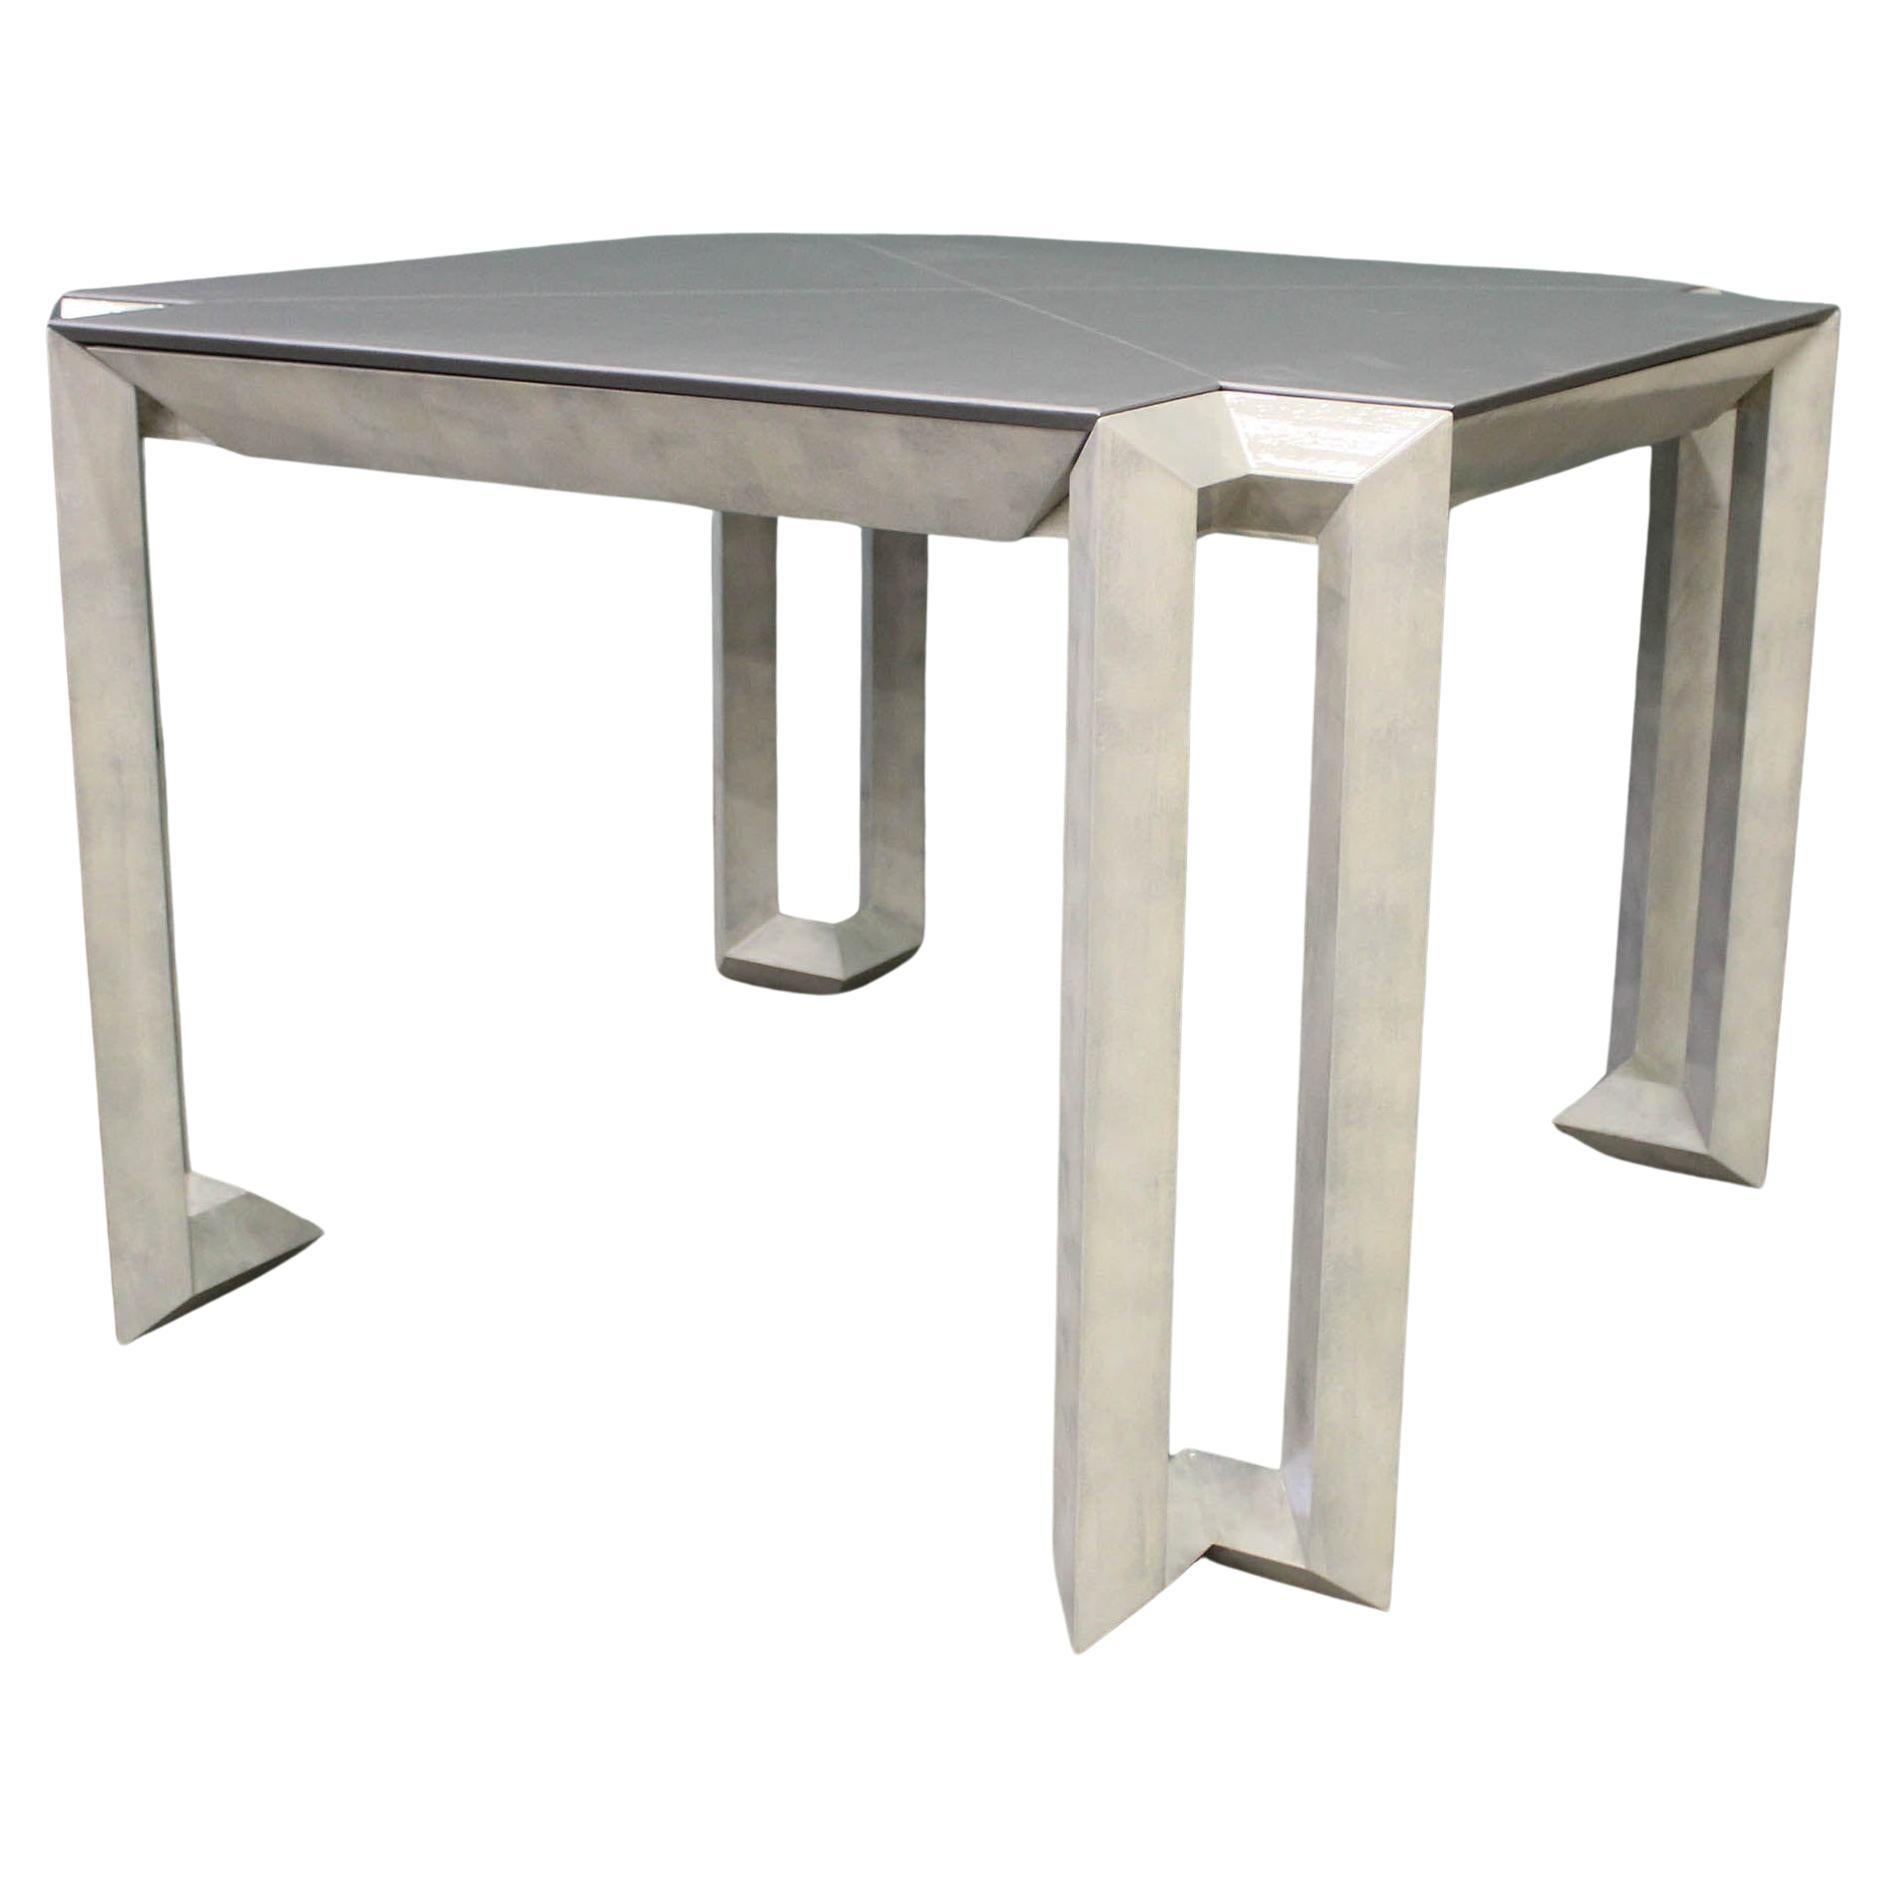 Blade/G Square Gray Game Table with Drawers designed by Casamanara For Sale